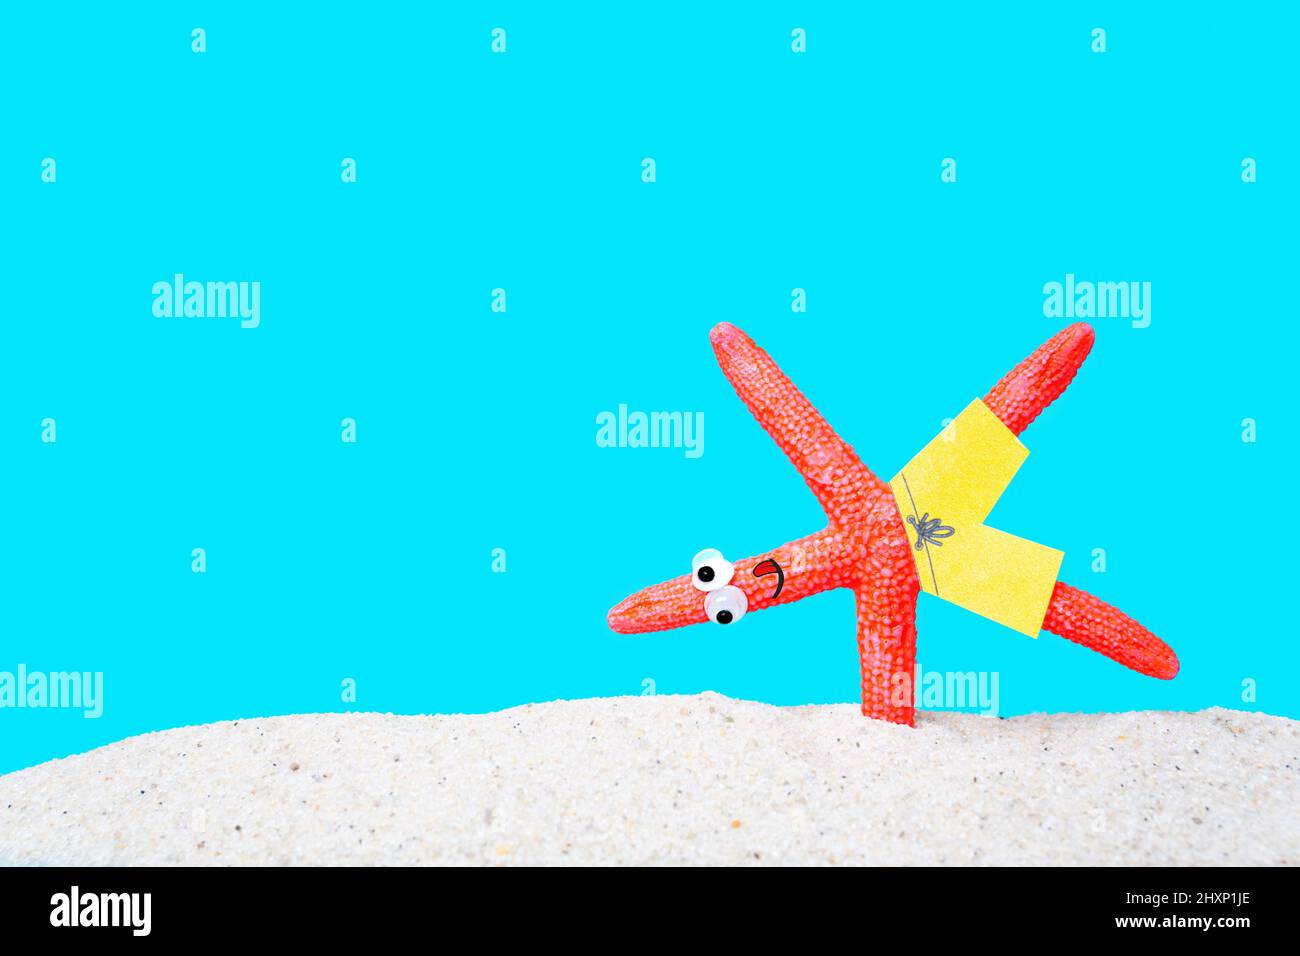 Funny starfish character making the one arm handstand on a sandy beach. Active summer vacation concept. Stock Photo